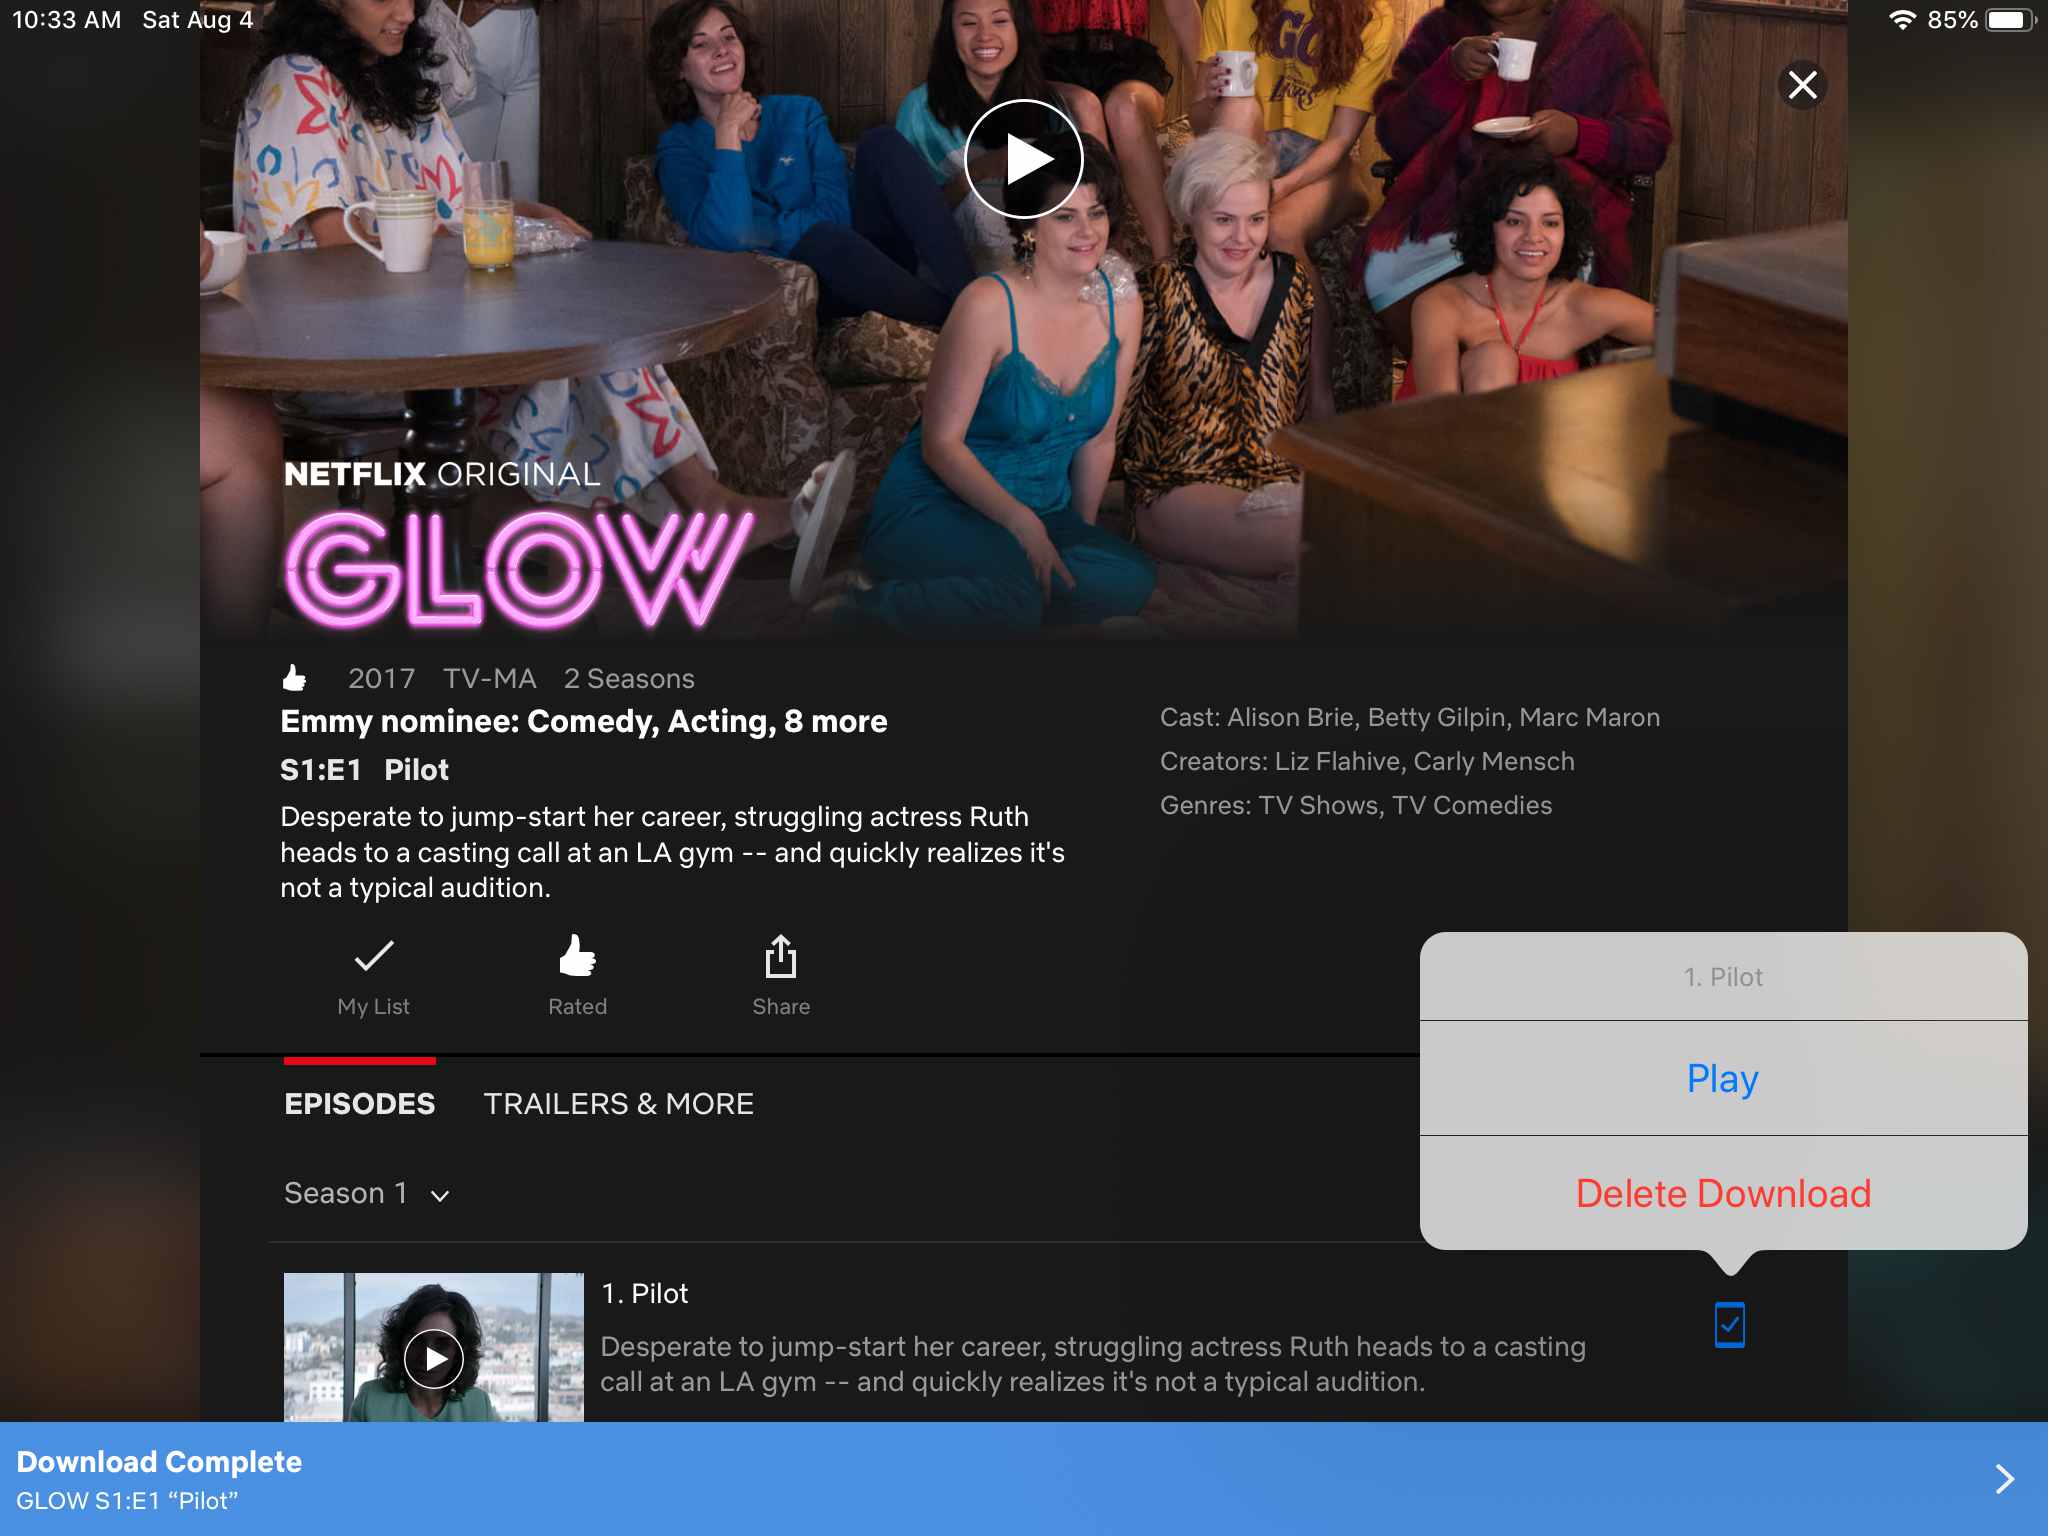 Download netflix movie for later viewing